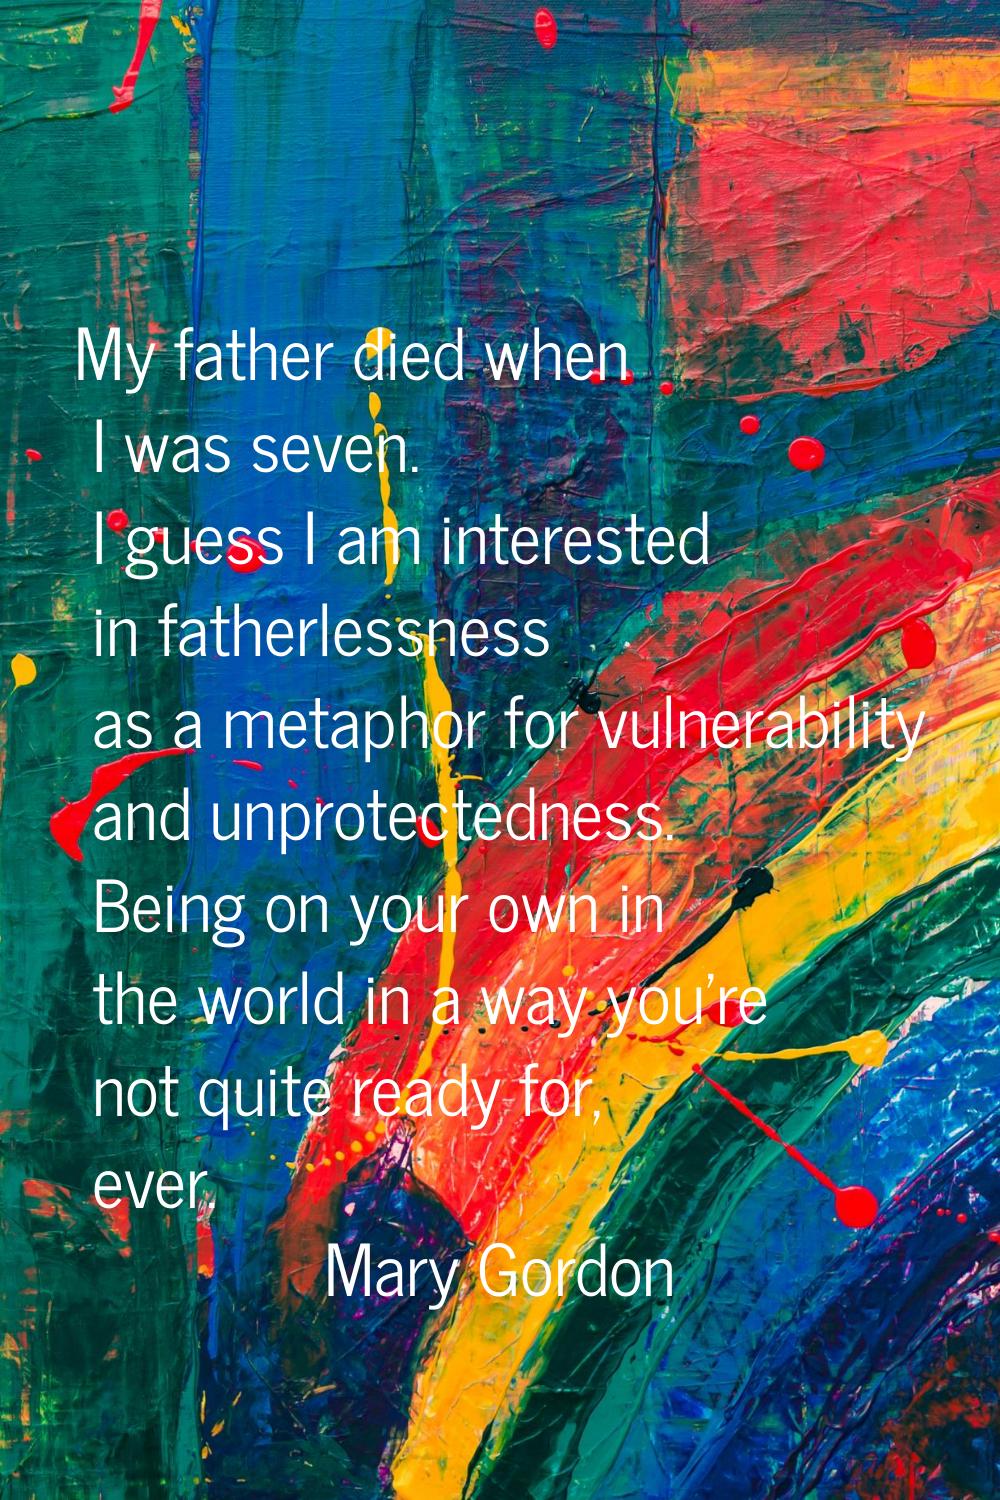 My father died when I was seven. I guess I am interested in fatherlessness as a metaphor for vulner